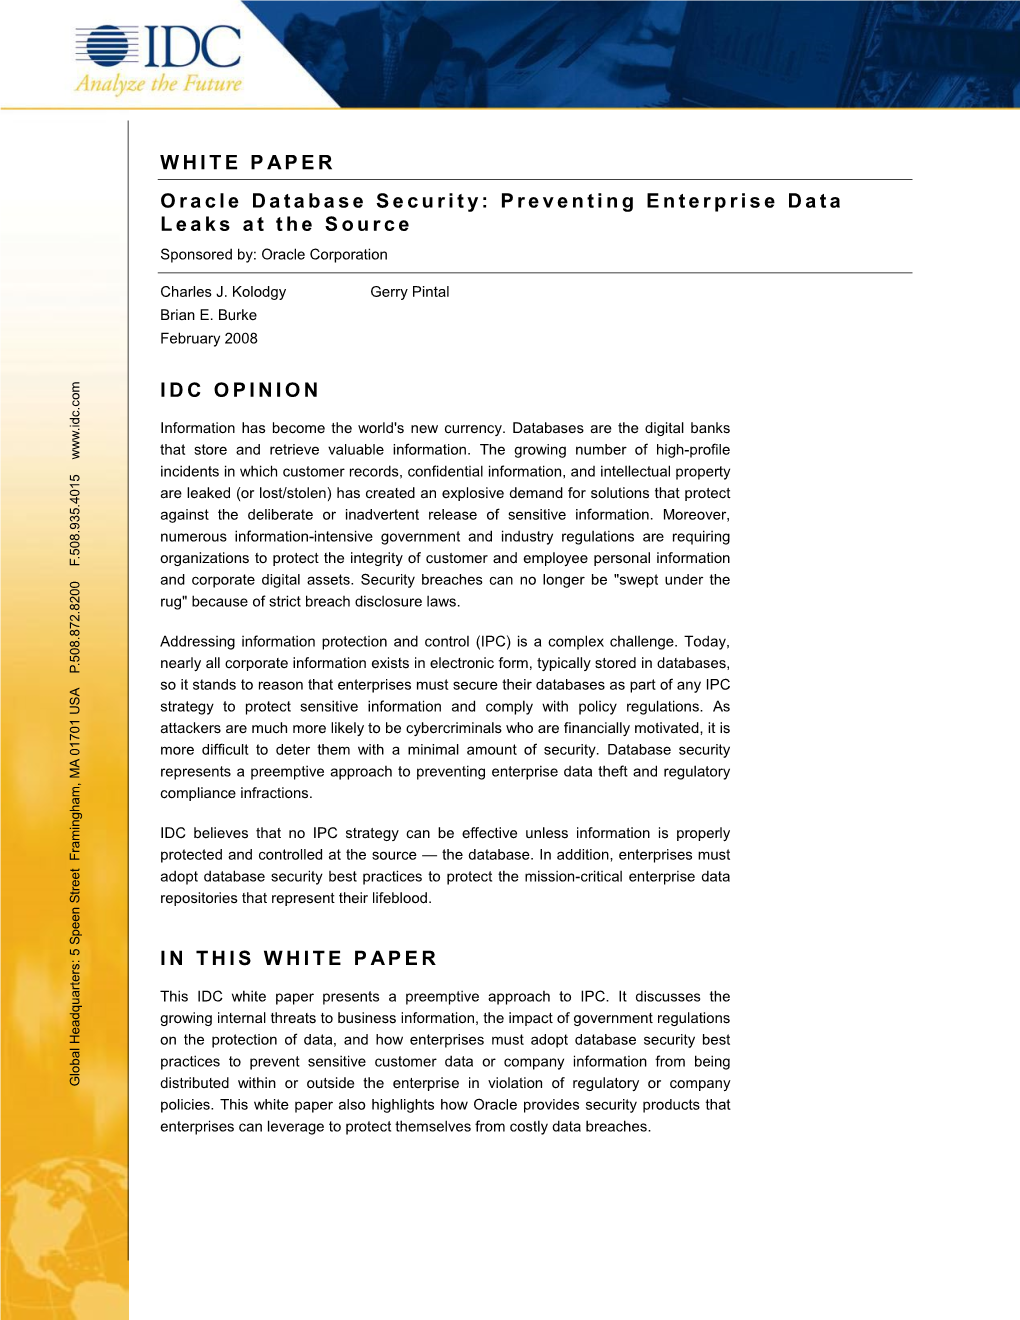 WHITE PAPER Oracle Database Security